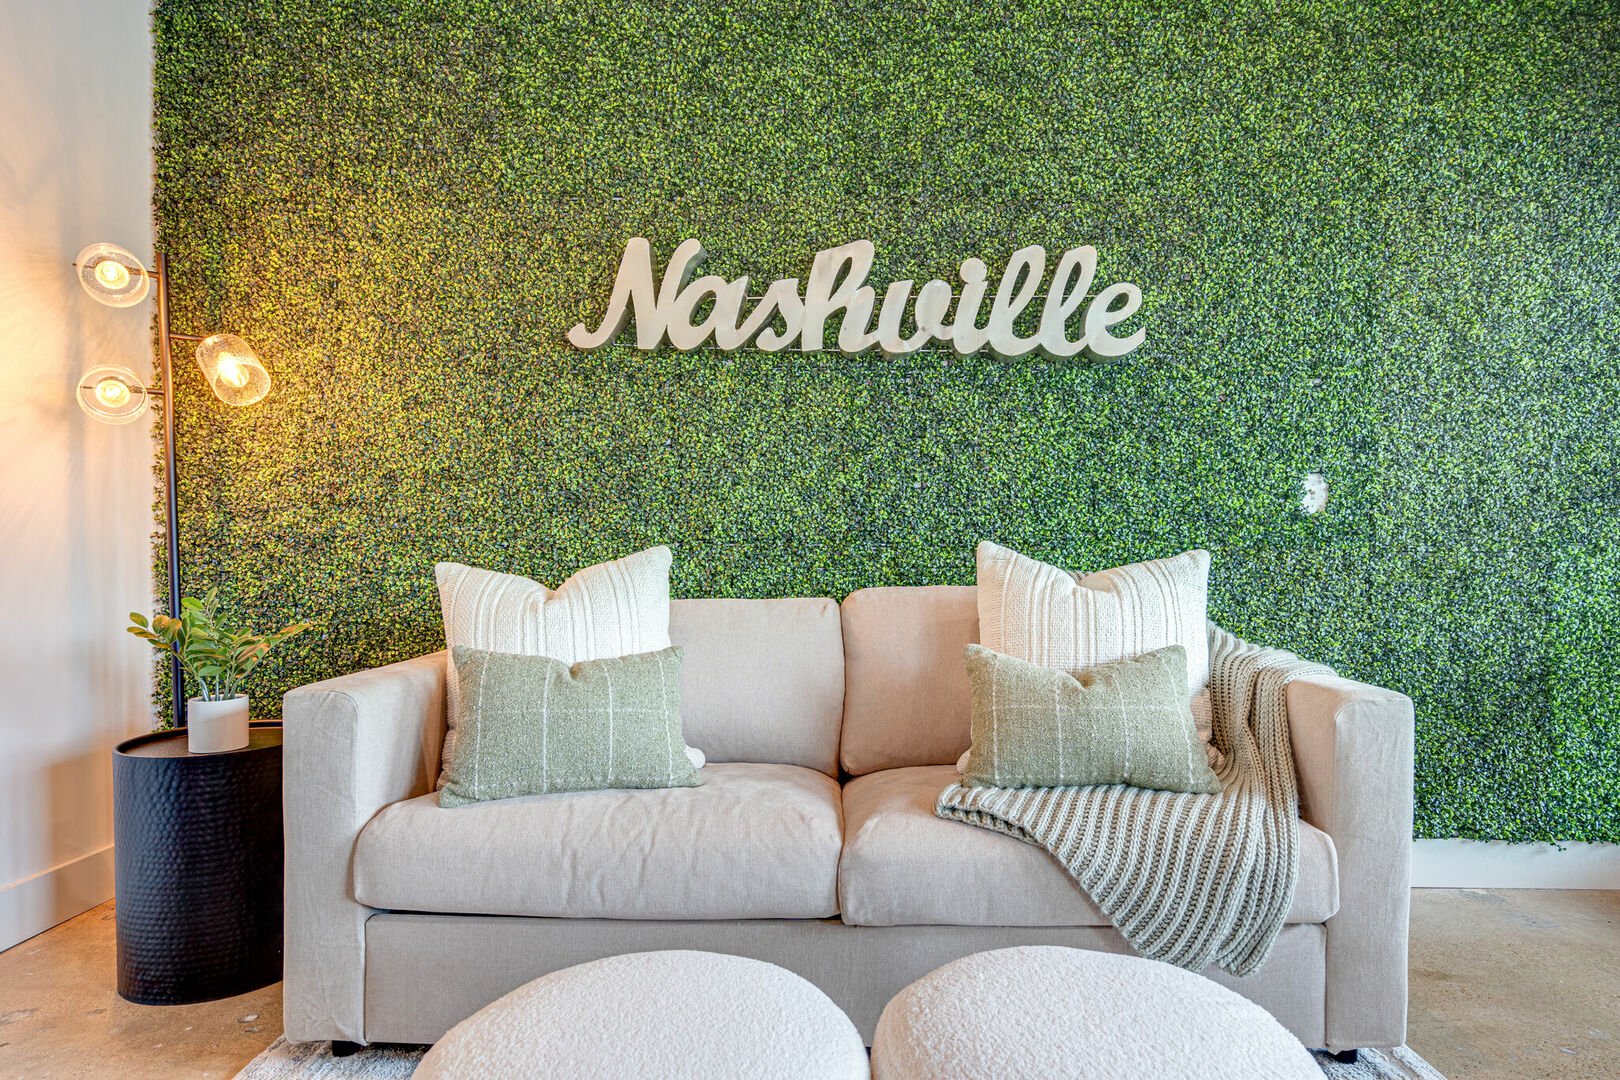 Light and Bright living space featuring Nashville themed designer furnishings!